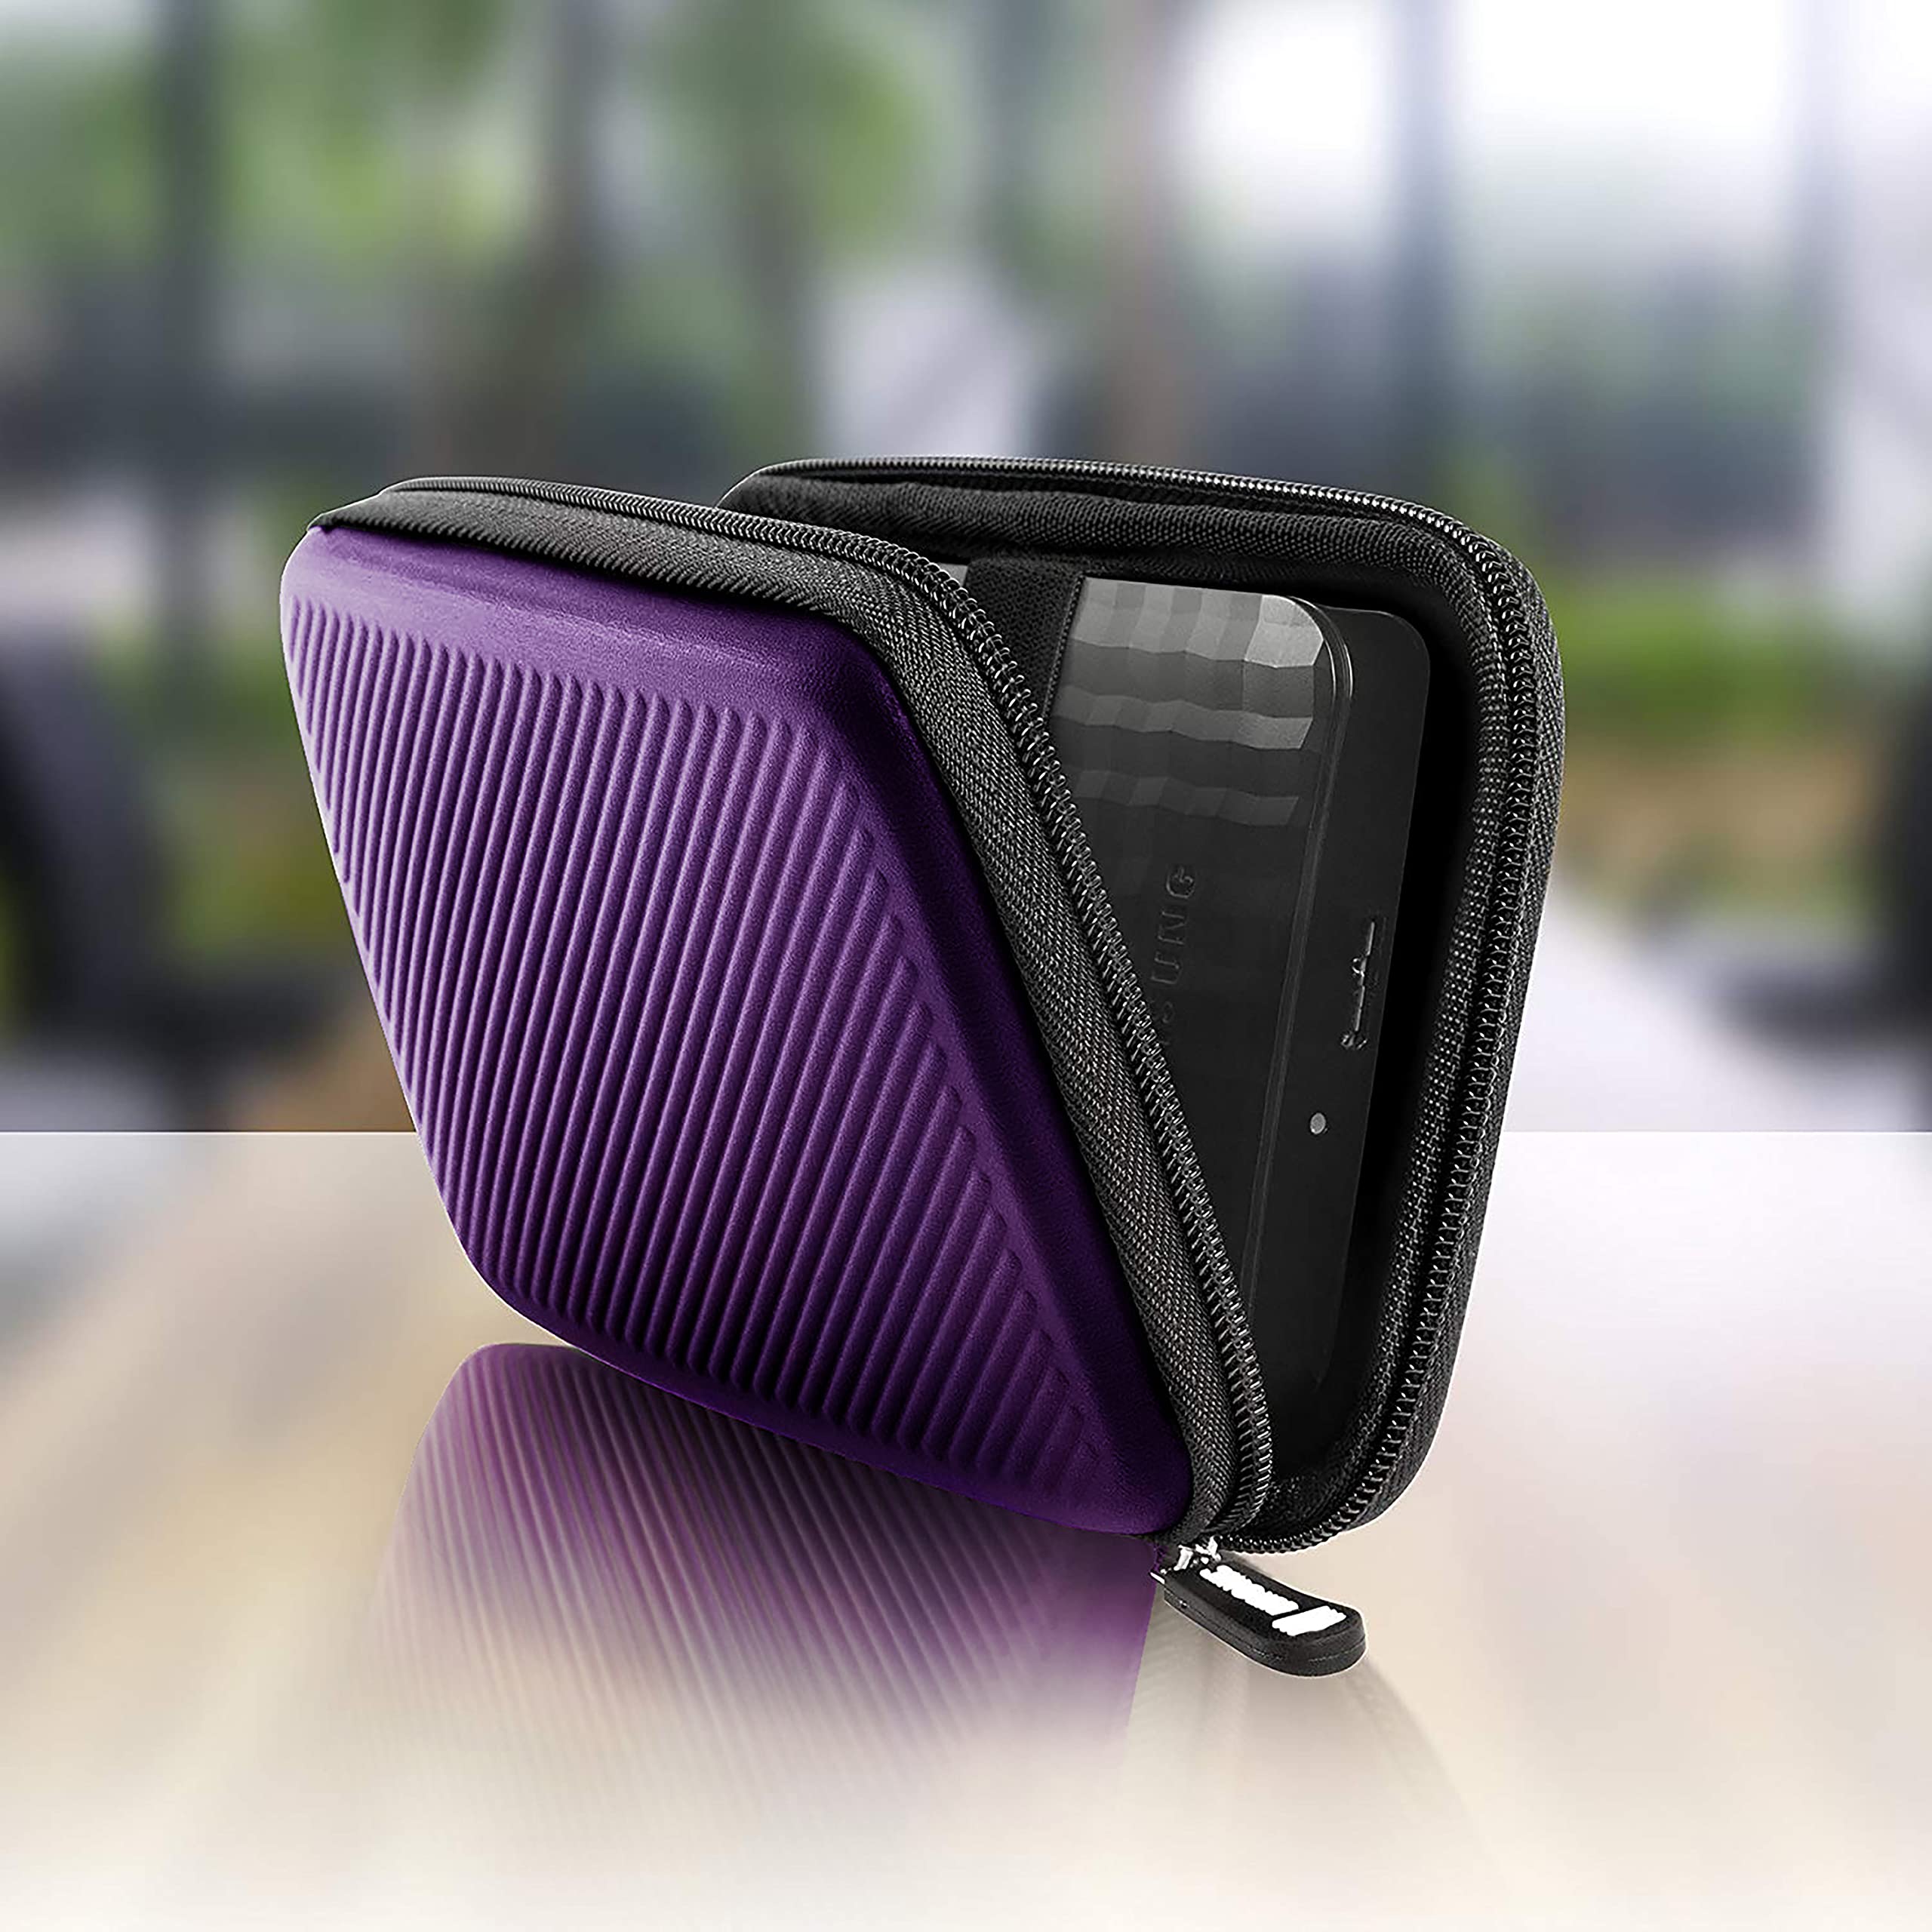 Duronic Hard Drive Case HDC2 /VT, VIOLET, Portable EVA Storage Pouch for External Hardrive & Cables, Lightweight & Protective, Suitable for WE/Western, Toshiba, Buffalo, Hitachi, Seagate, Samsung